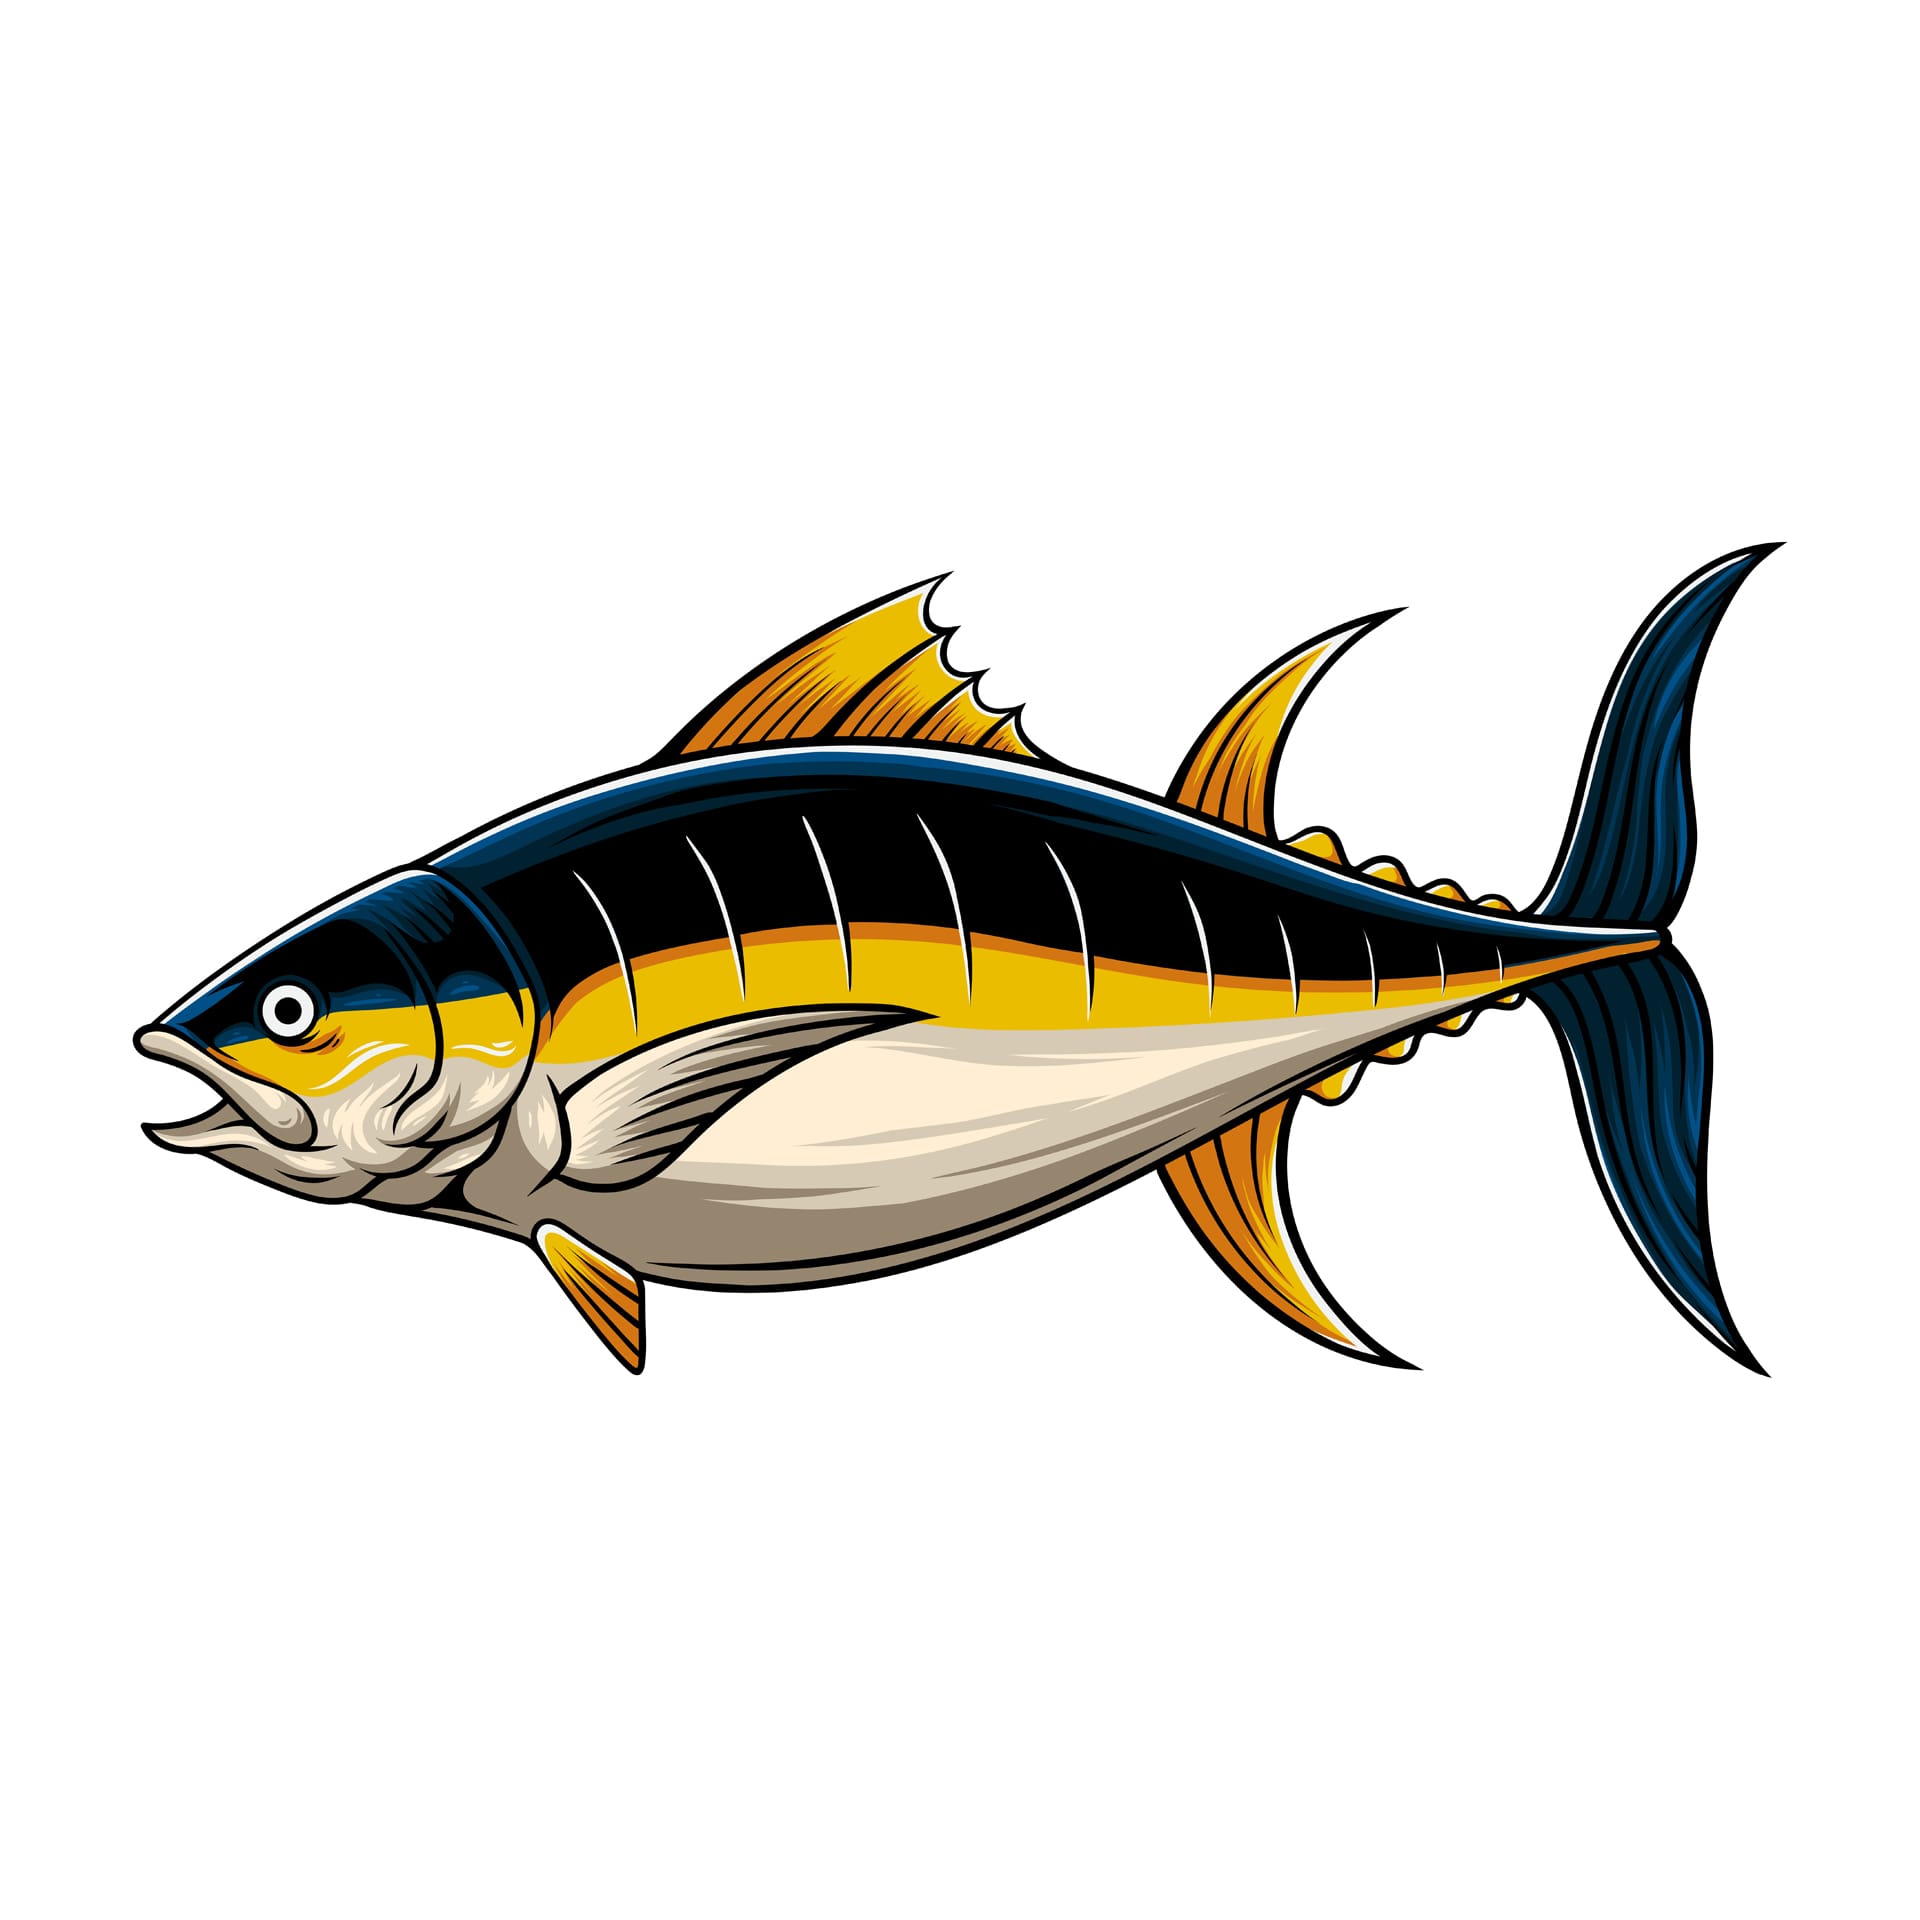 Cool tuna vintage style illustration with premium quality stock